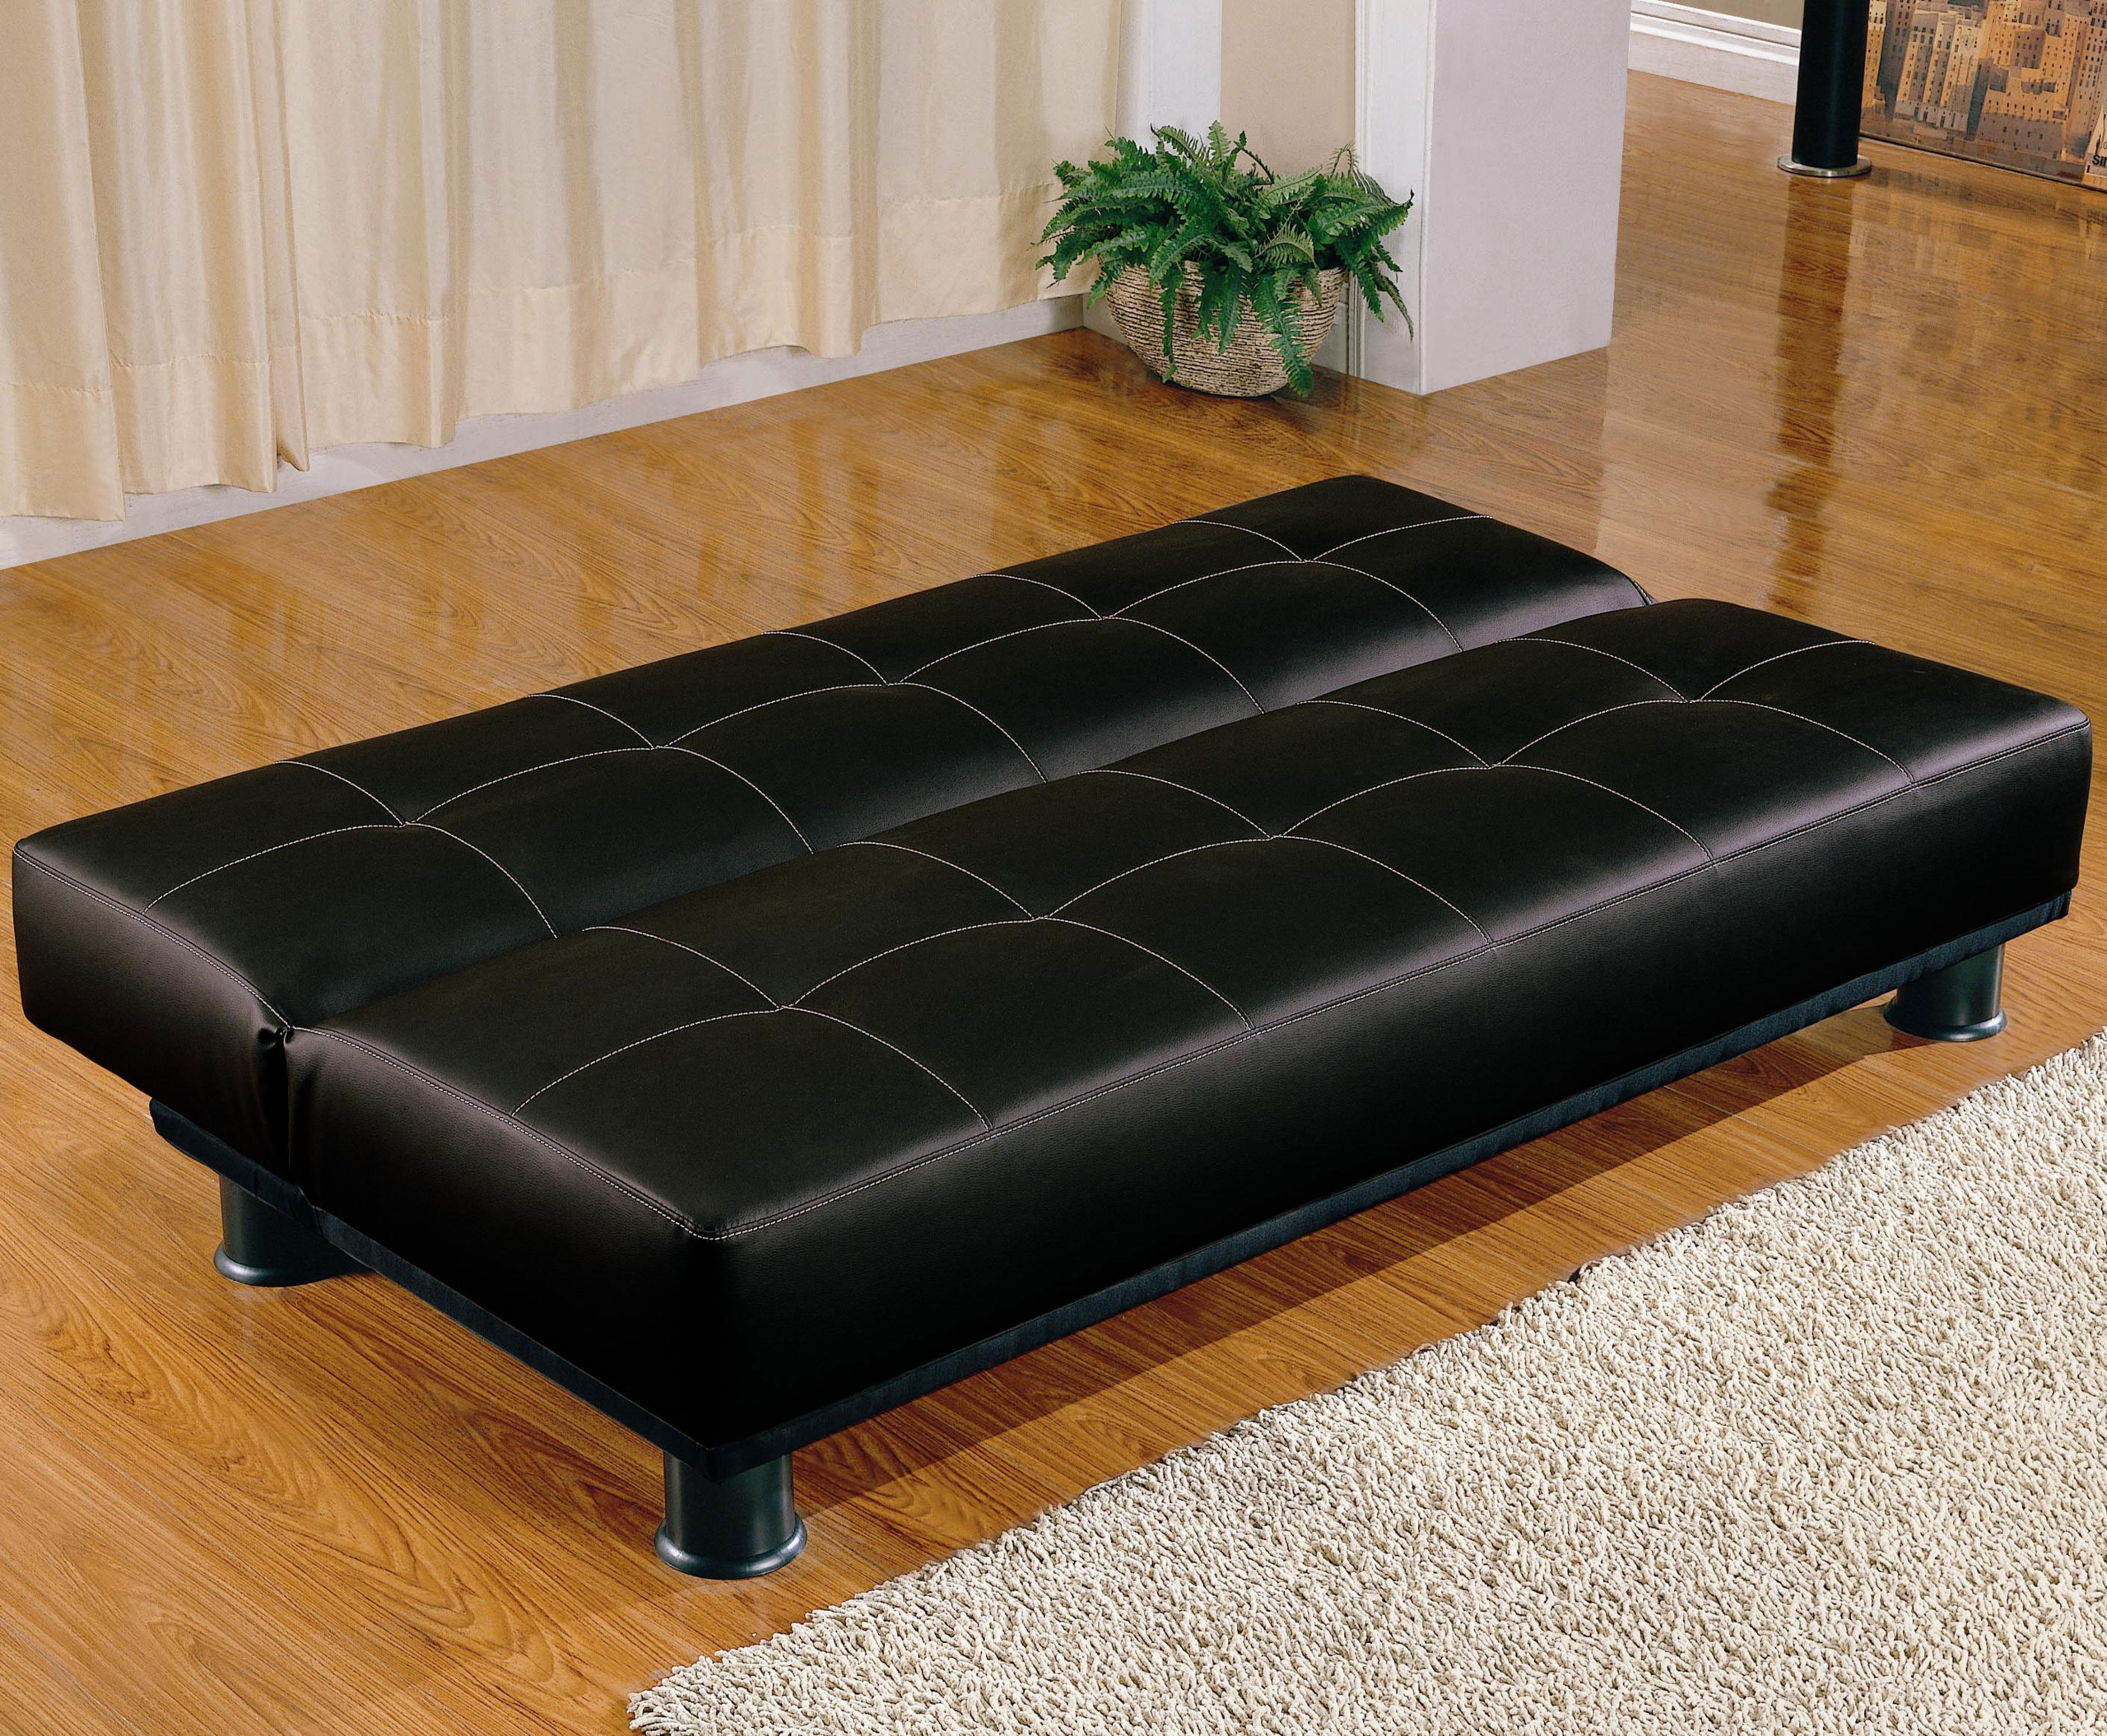 Coaster black faux leather contemporary armless convertible sofa bed 1